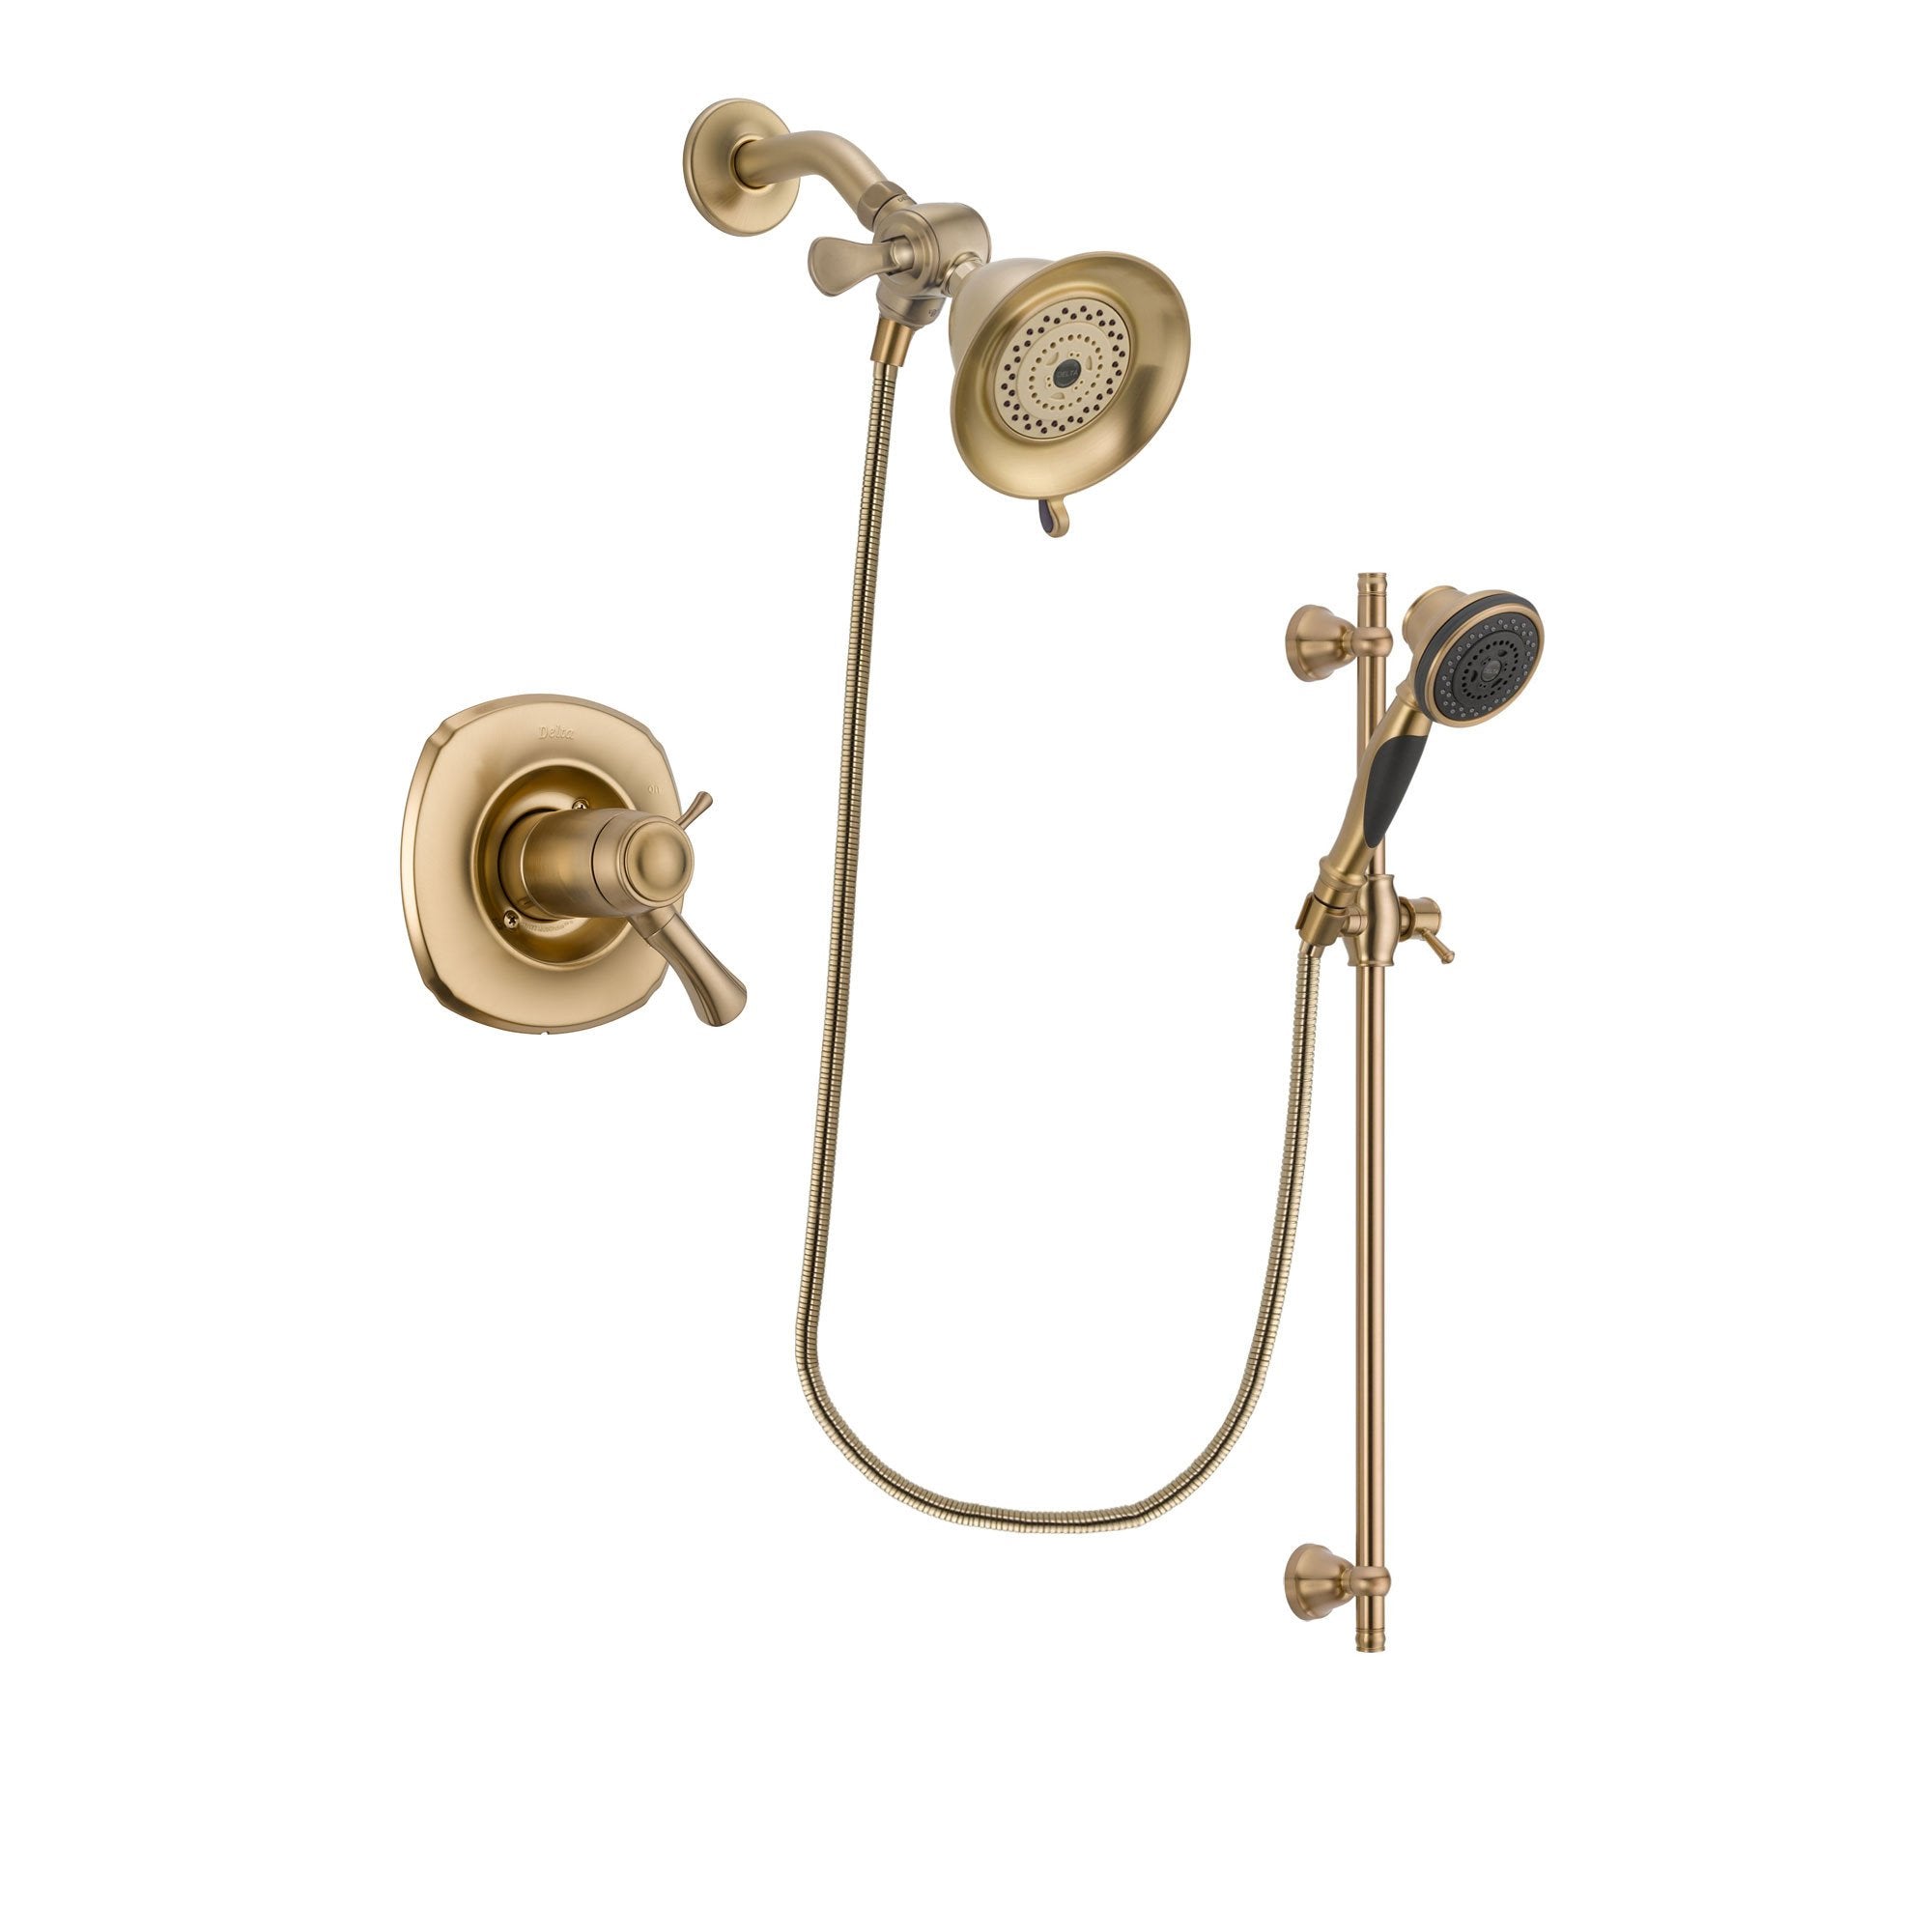 Delta Addison Champagne Bronze Finish Thermostatic Shower Faucet System Package with Water-Efficient Shower Head and Personal Handheld Shower Spray with Slide Bar Includes Rough-in Valve DSP3530V